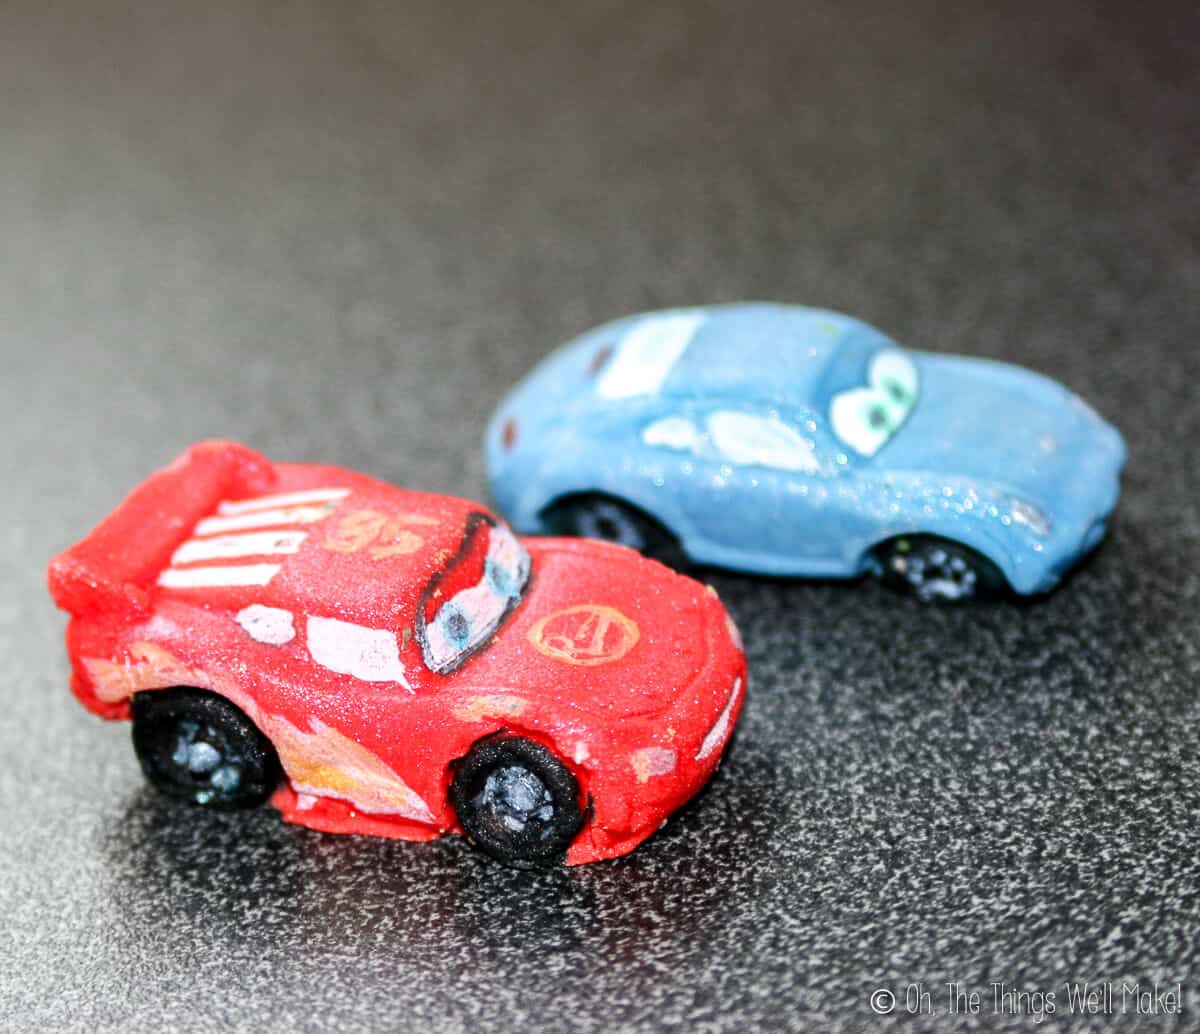 Blue Sally and red Lightning McQueen cars made from fondant.